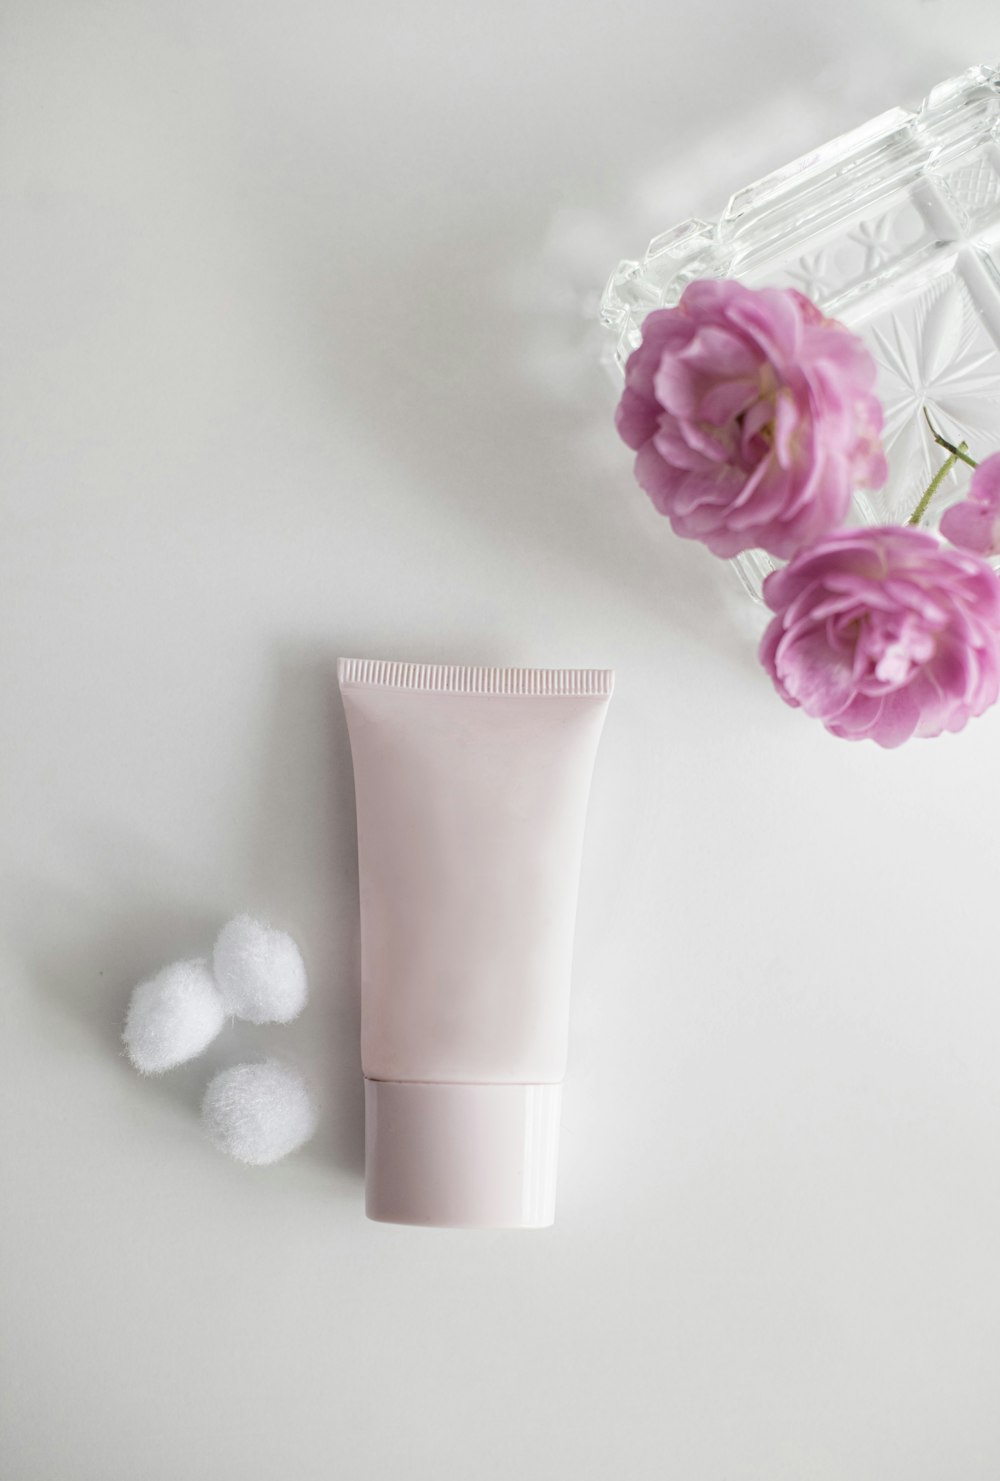 a tube of cream next to a pink flower